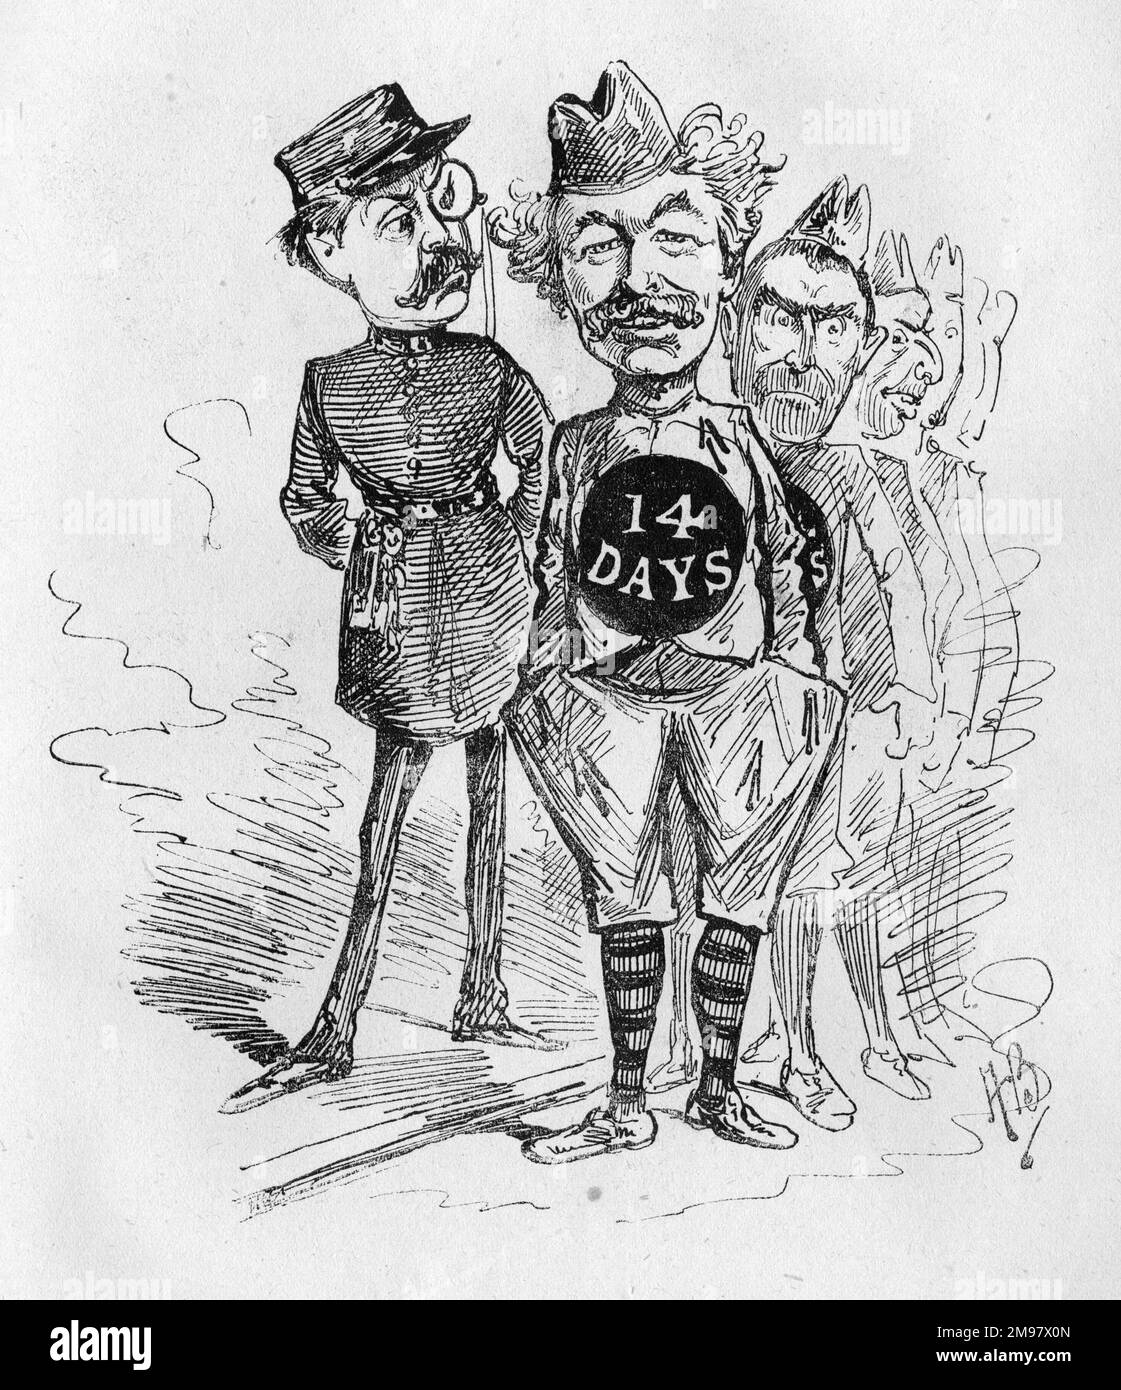 Cartoon of Charles Wyndham (1837-1919), English actor-manager, playing the part of a prisoner, Peregrine Porter, in a play by Henry James Byron (1835-1884), seen here on the left as a prison guard. The play, translated from French, was entitled Fourteen Days, and ran at the Criterion Theatre, Piccadilly, London. The play is about a man who is sent to prison but, to conceal this unpleasant fact, tells family and friends that he is going abroad. Stock Photo